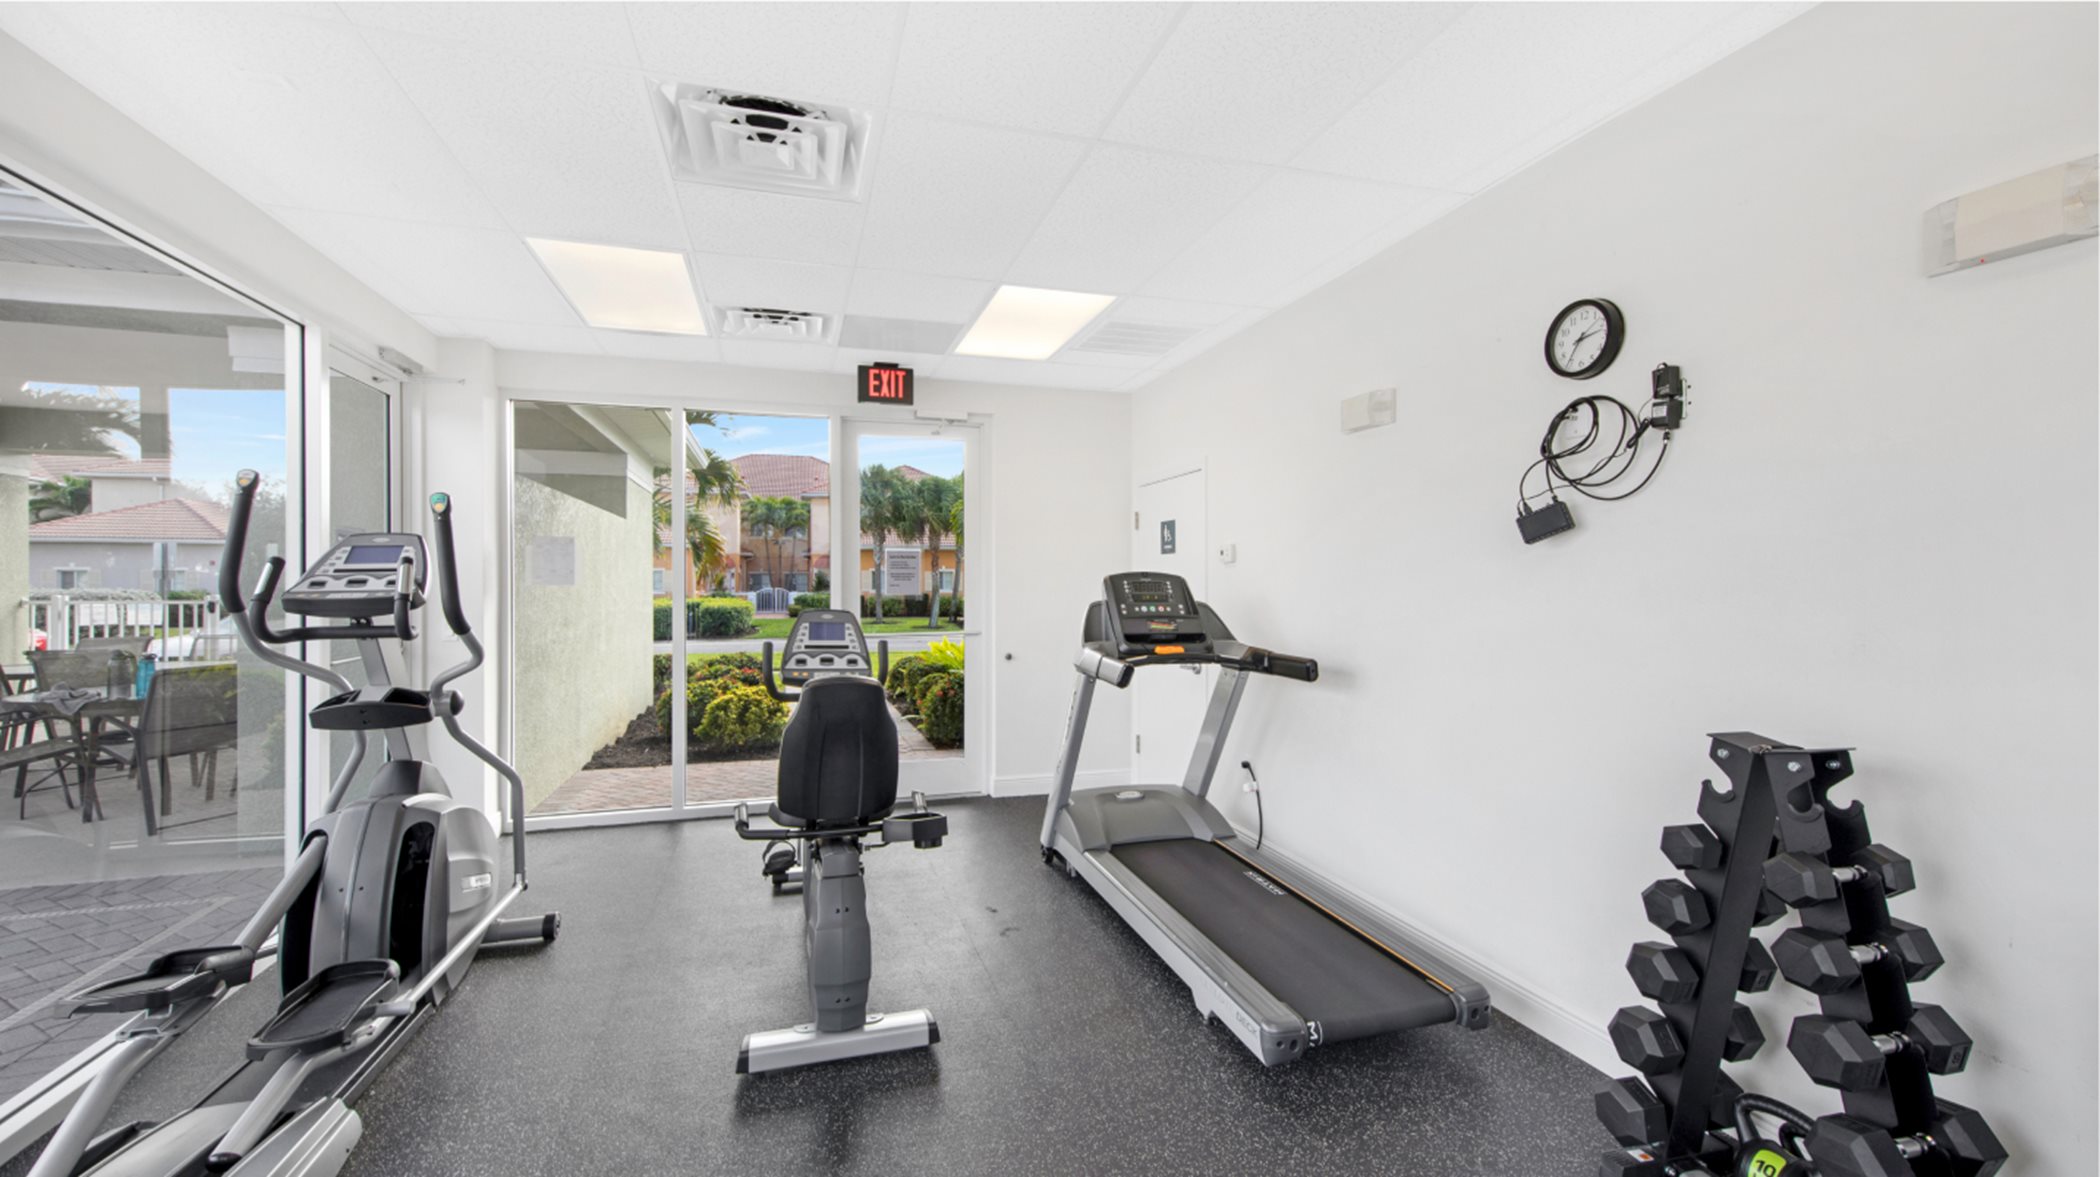 Fitness center with treadmills and weight lifting equipment